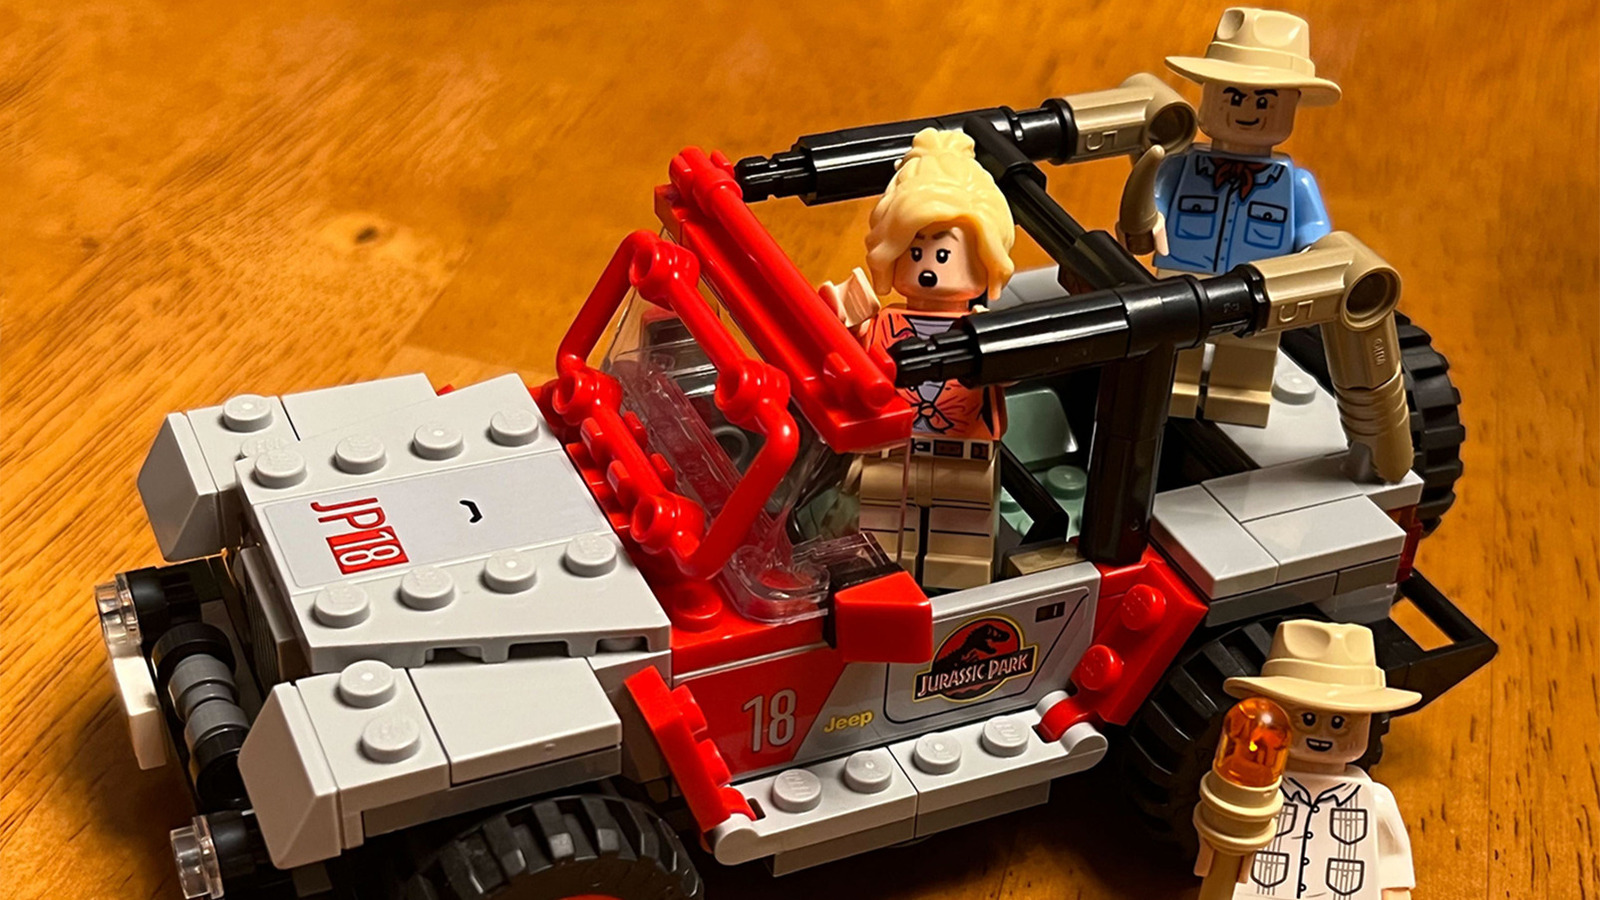 New Jurassic Park Lego Sets Are Breezy Builds With Cool Vehicles, Simple  Dinos & Cute Easter Eggs